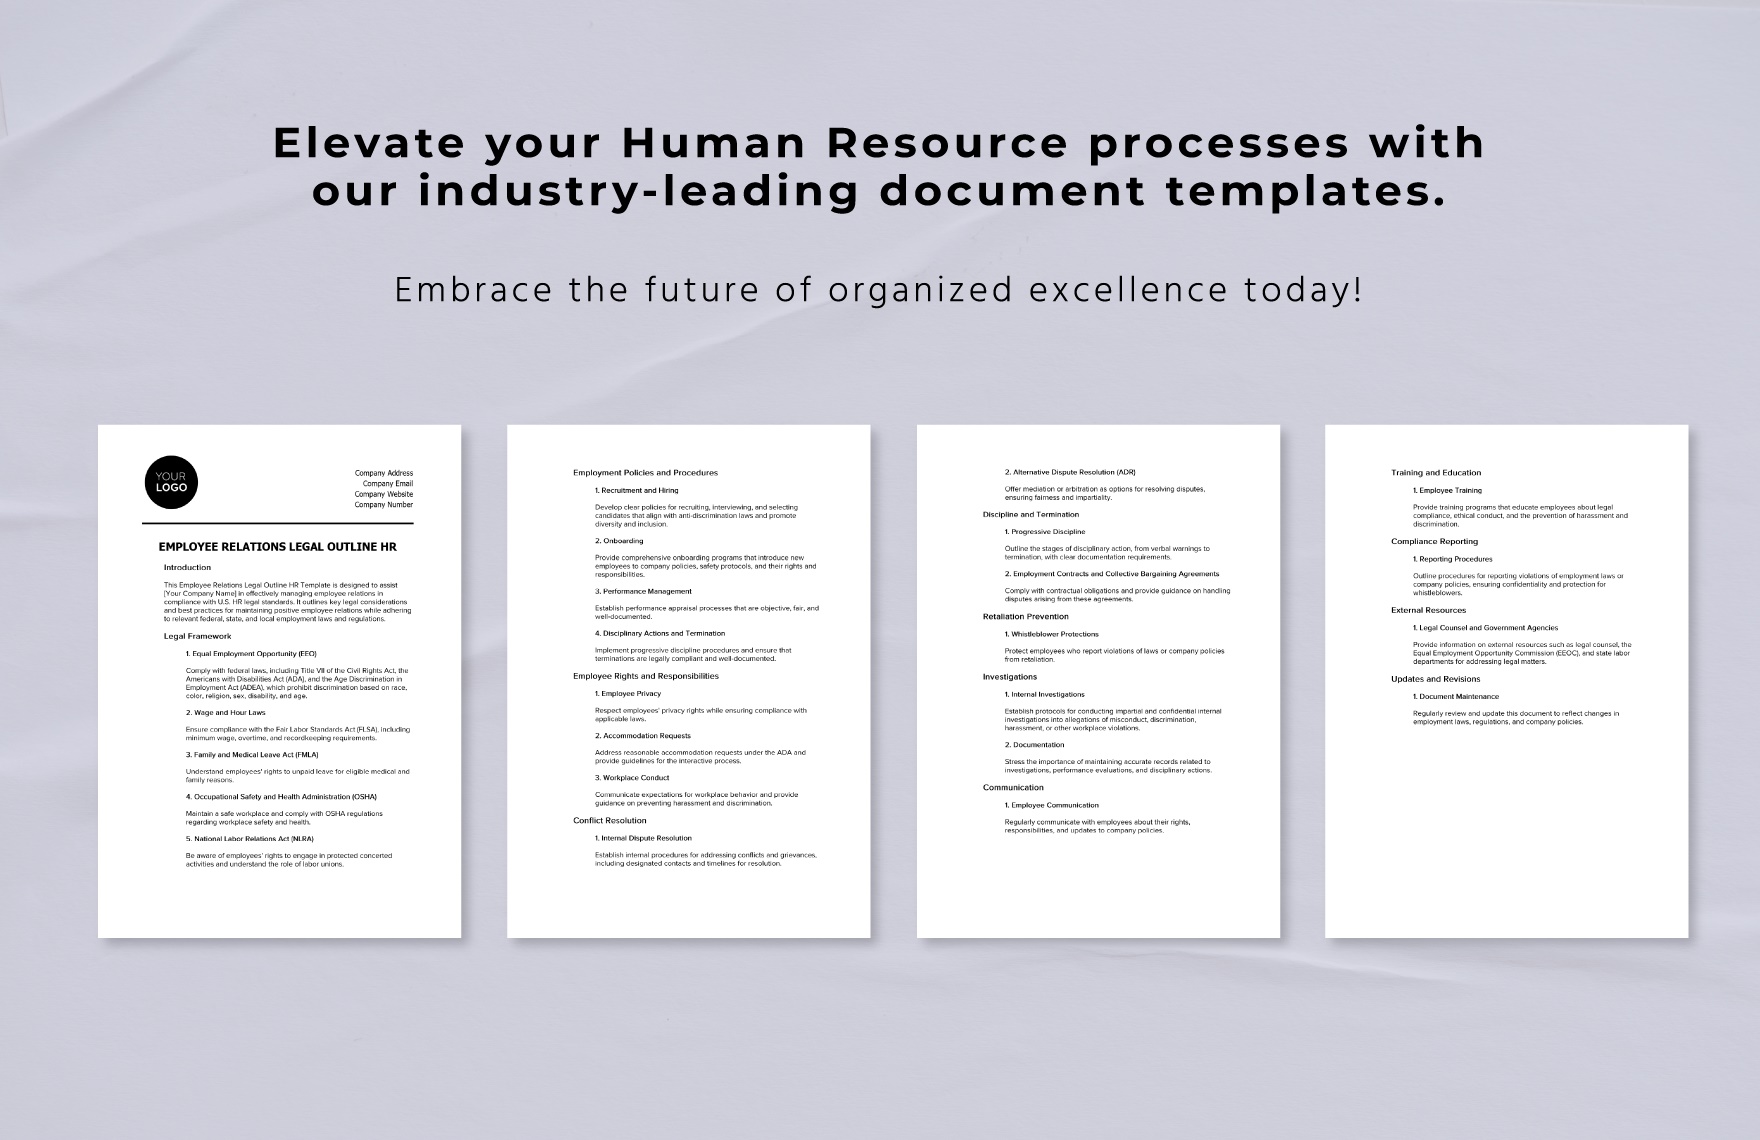 Employee Relations Legal Outline HR Template